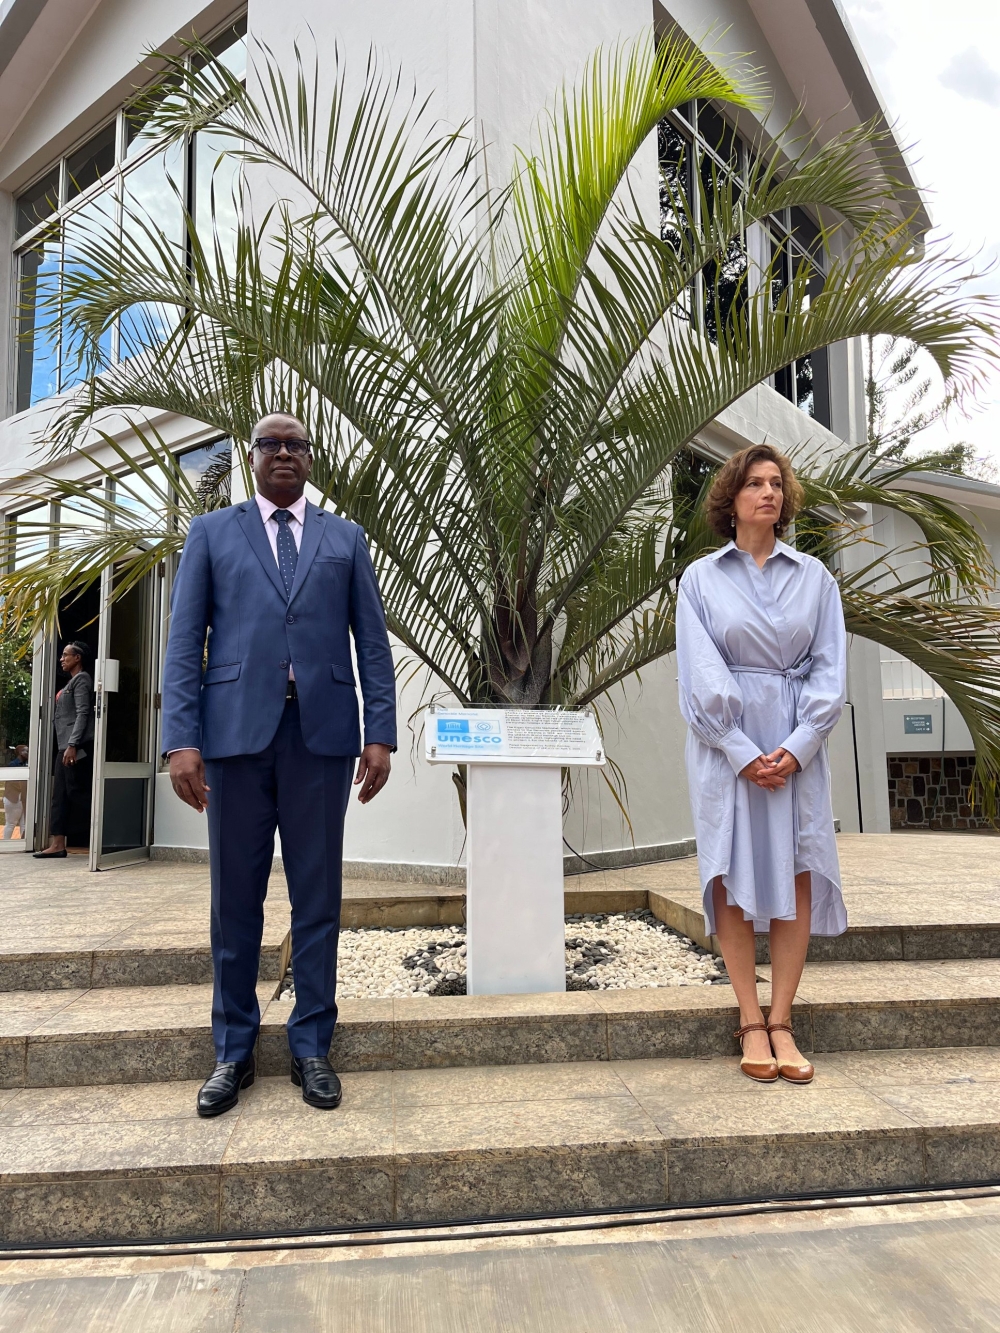 The Minister of National Unity and Civic Engagement, Jean-Damascène Bizimana and UNESCO Director-General, Audrey Azoulay  after handover